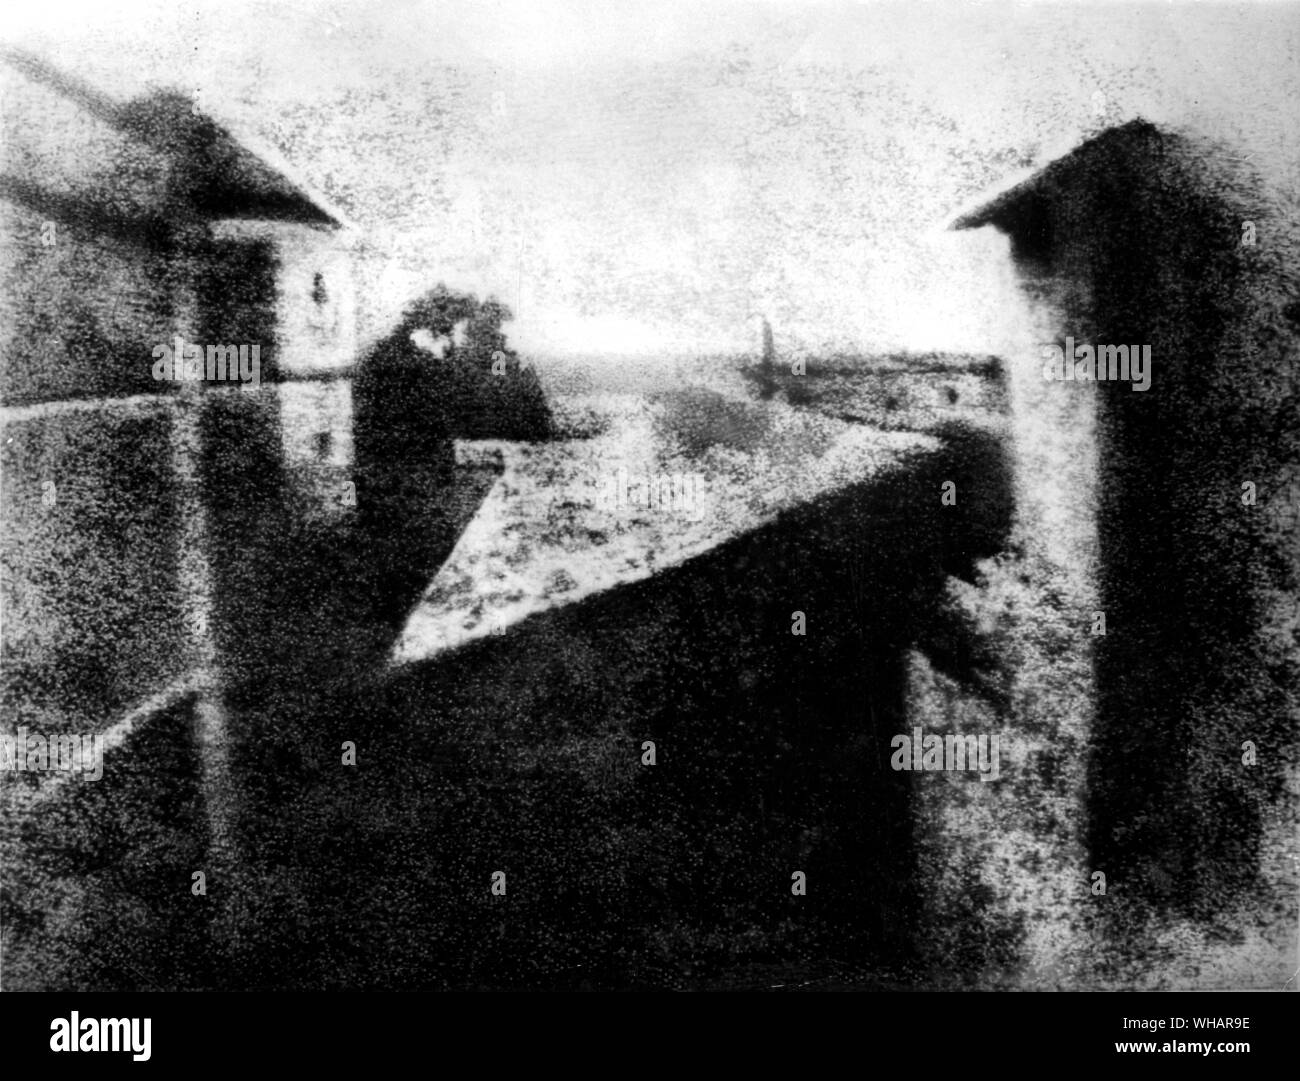 The worlds first photograph 1826. by Niepce on a pewter plate showing the view from Niepce's window at Gras near Chalon sur Saone Stock Photo